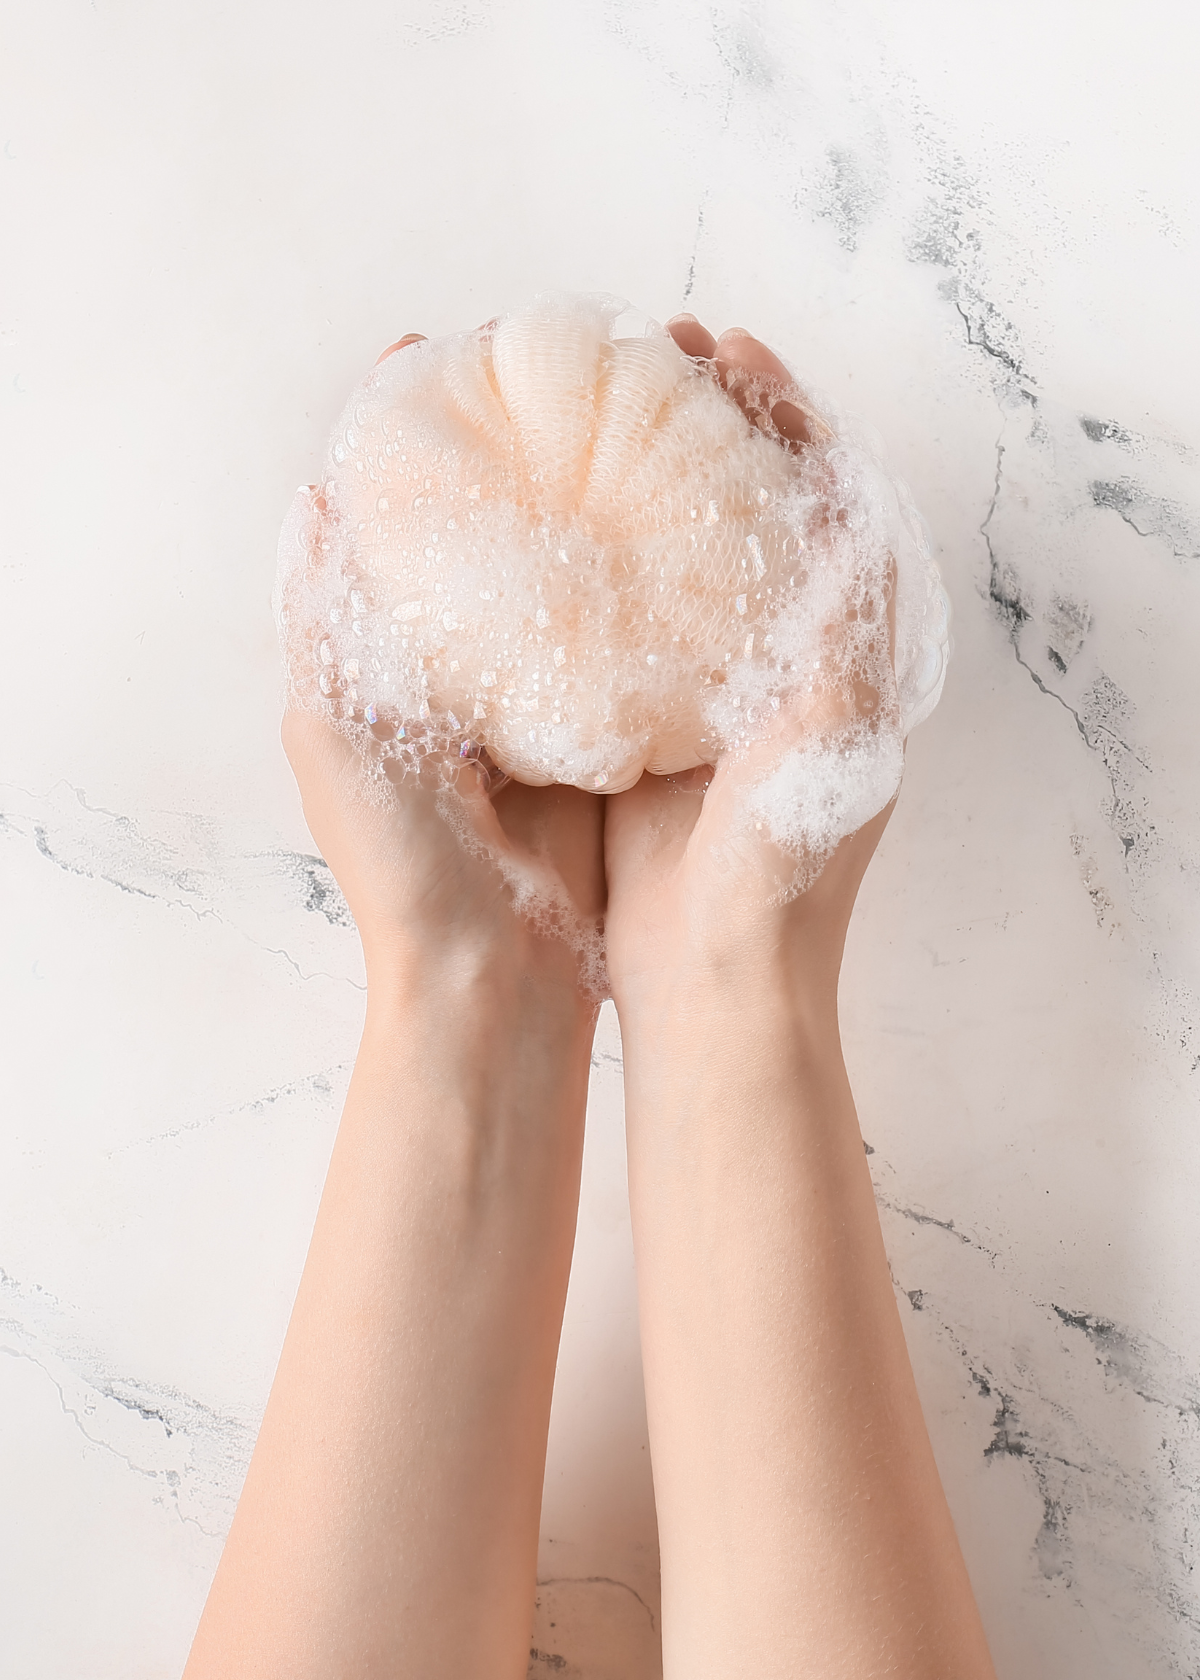 6 Best Smelling Body Washes for Women: Indulge in Luxury